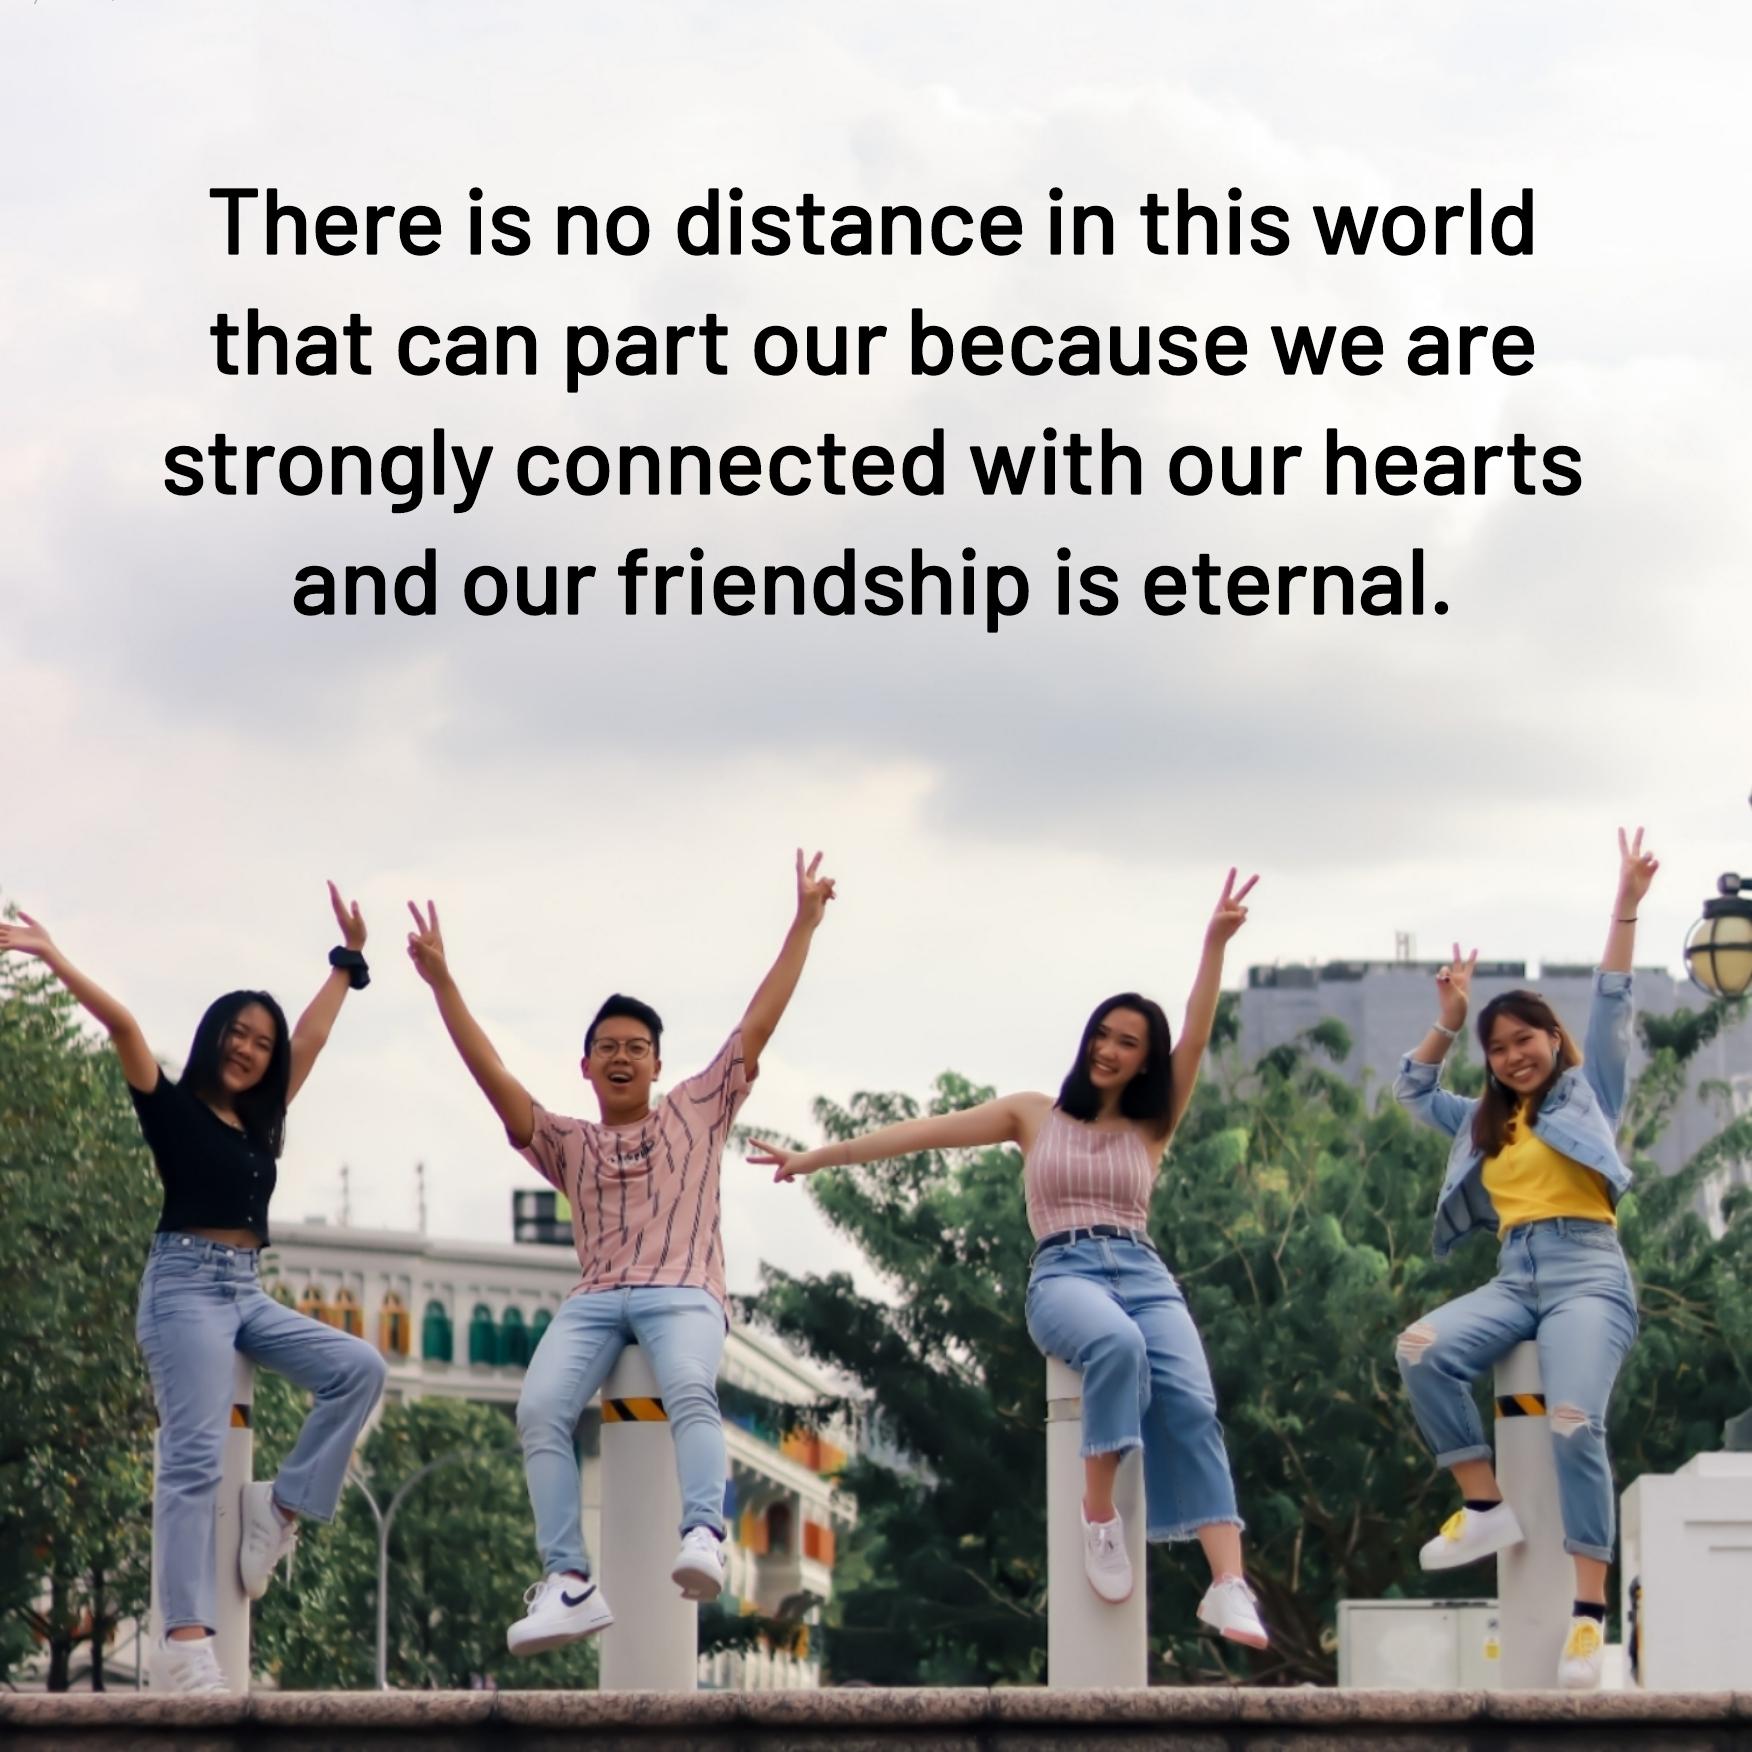 There is no distance in this world that can part our